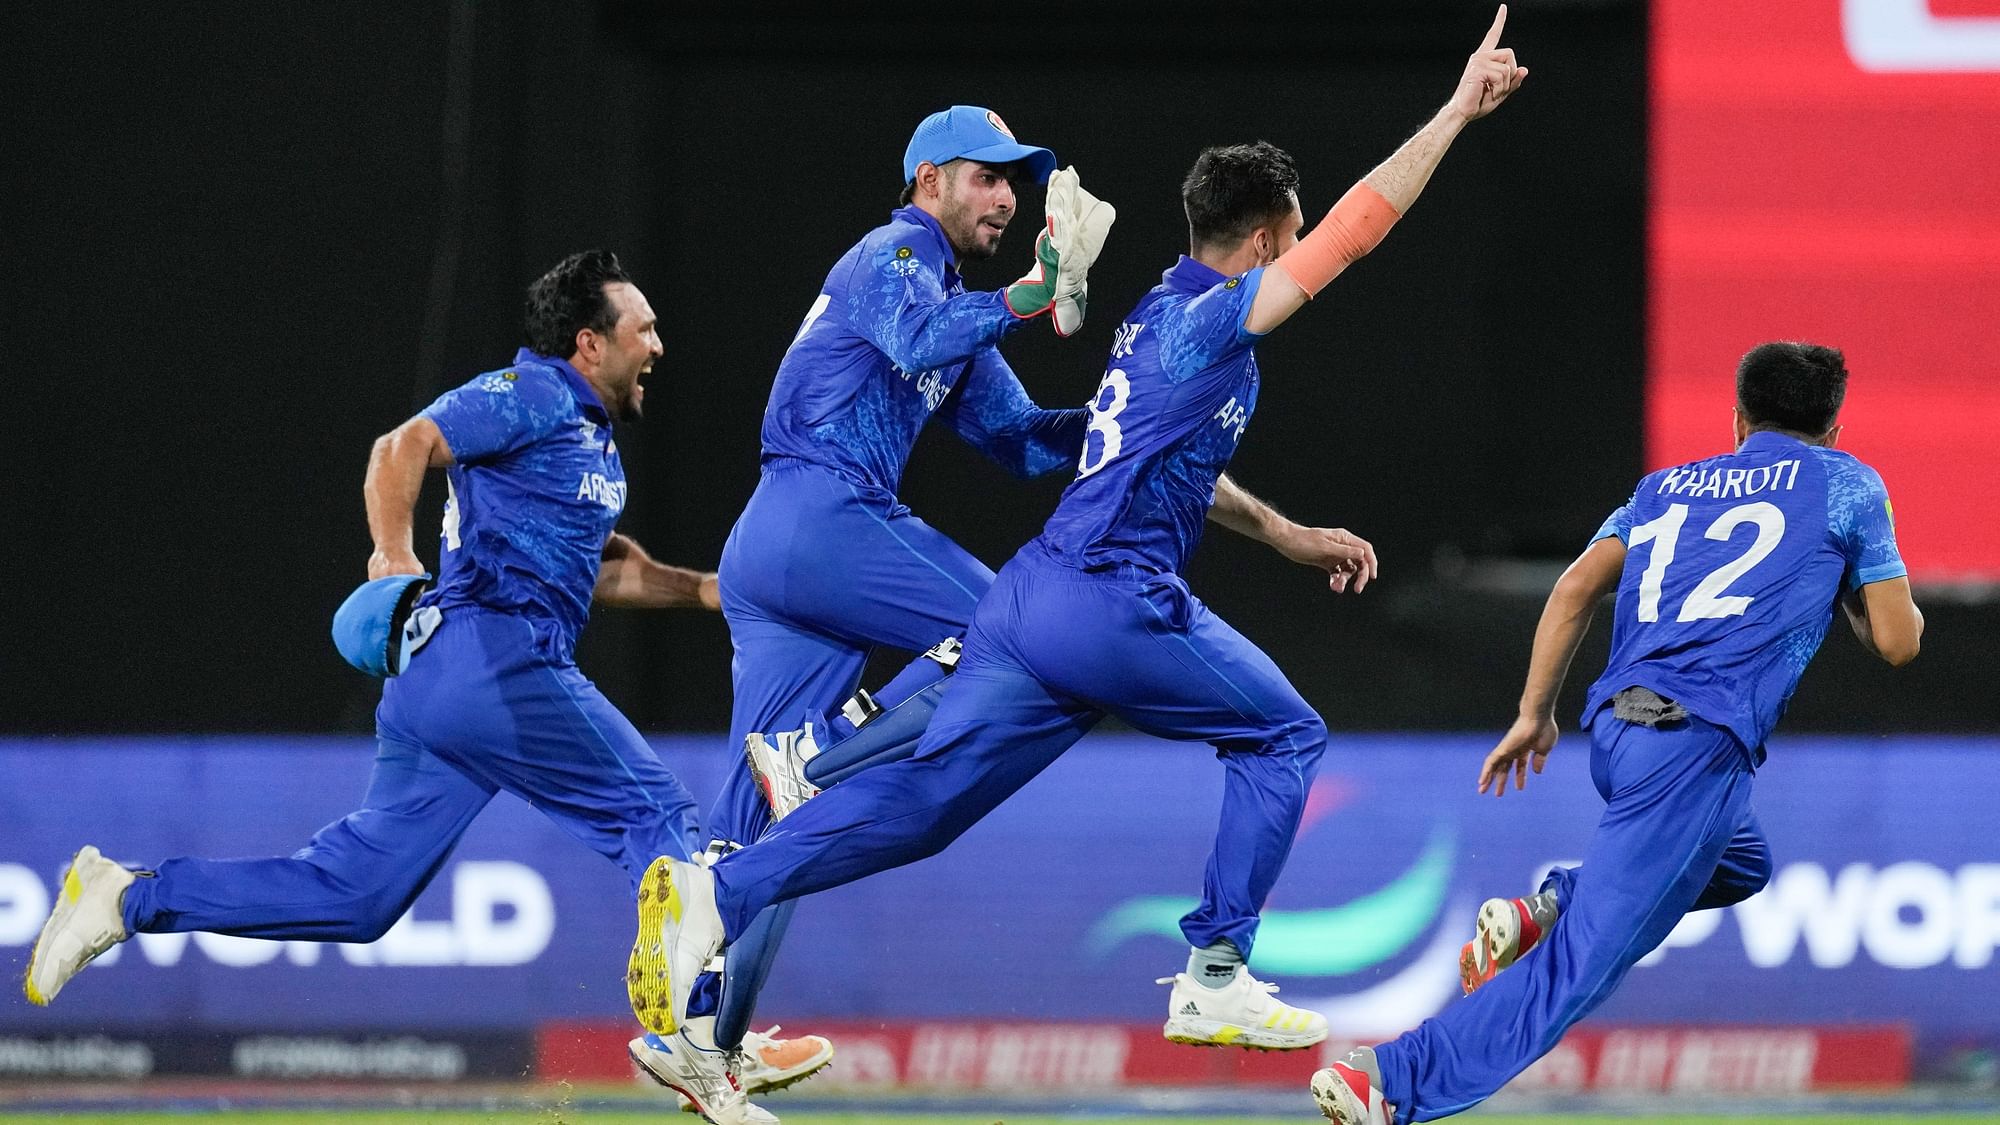 <div class="paragraphs"><p>Afghanistan's Ibrahim Zadran, centre, reacts with teammates after taking the wicket of Bangladesh's Mustafizur Rahman to win by eight runs in their men's T20 World Cup cricket match at Arnos Vale Ground, Kingstown, Saint Vincent and the Grenadines, Monday,</p></div>